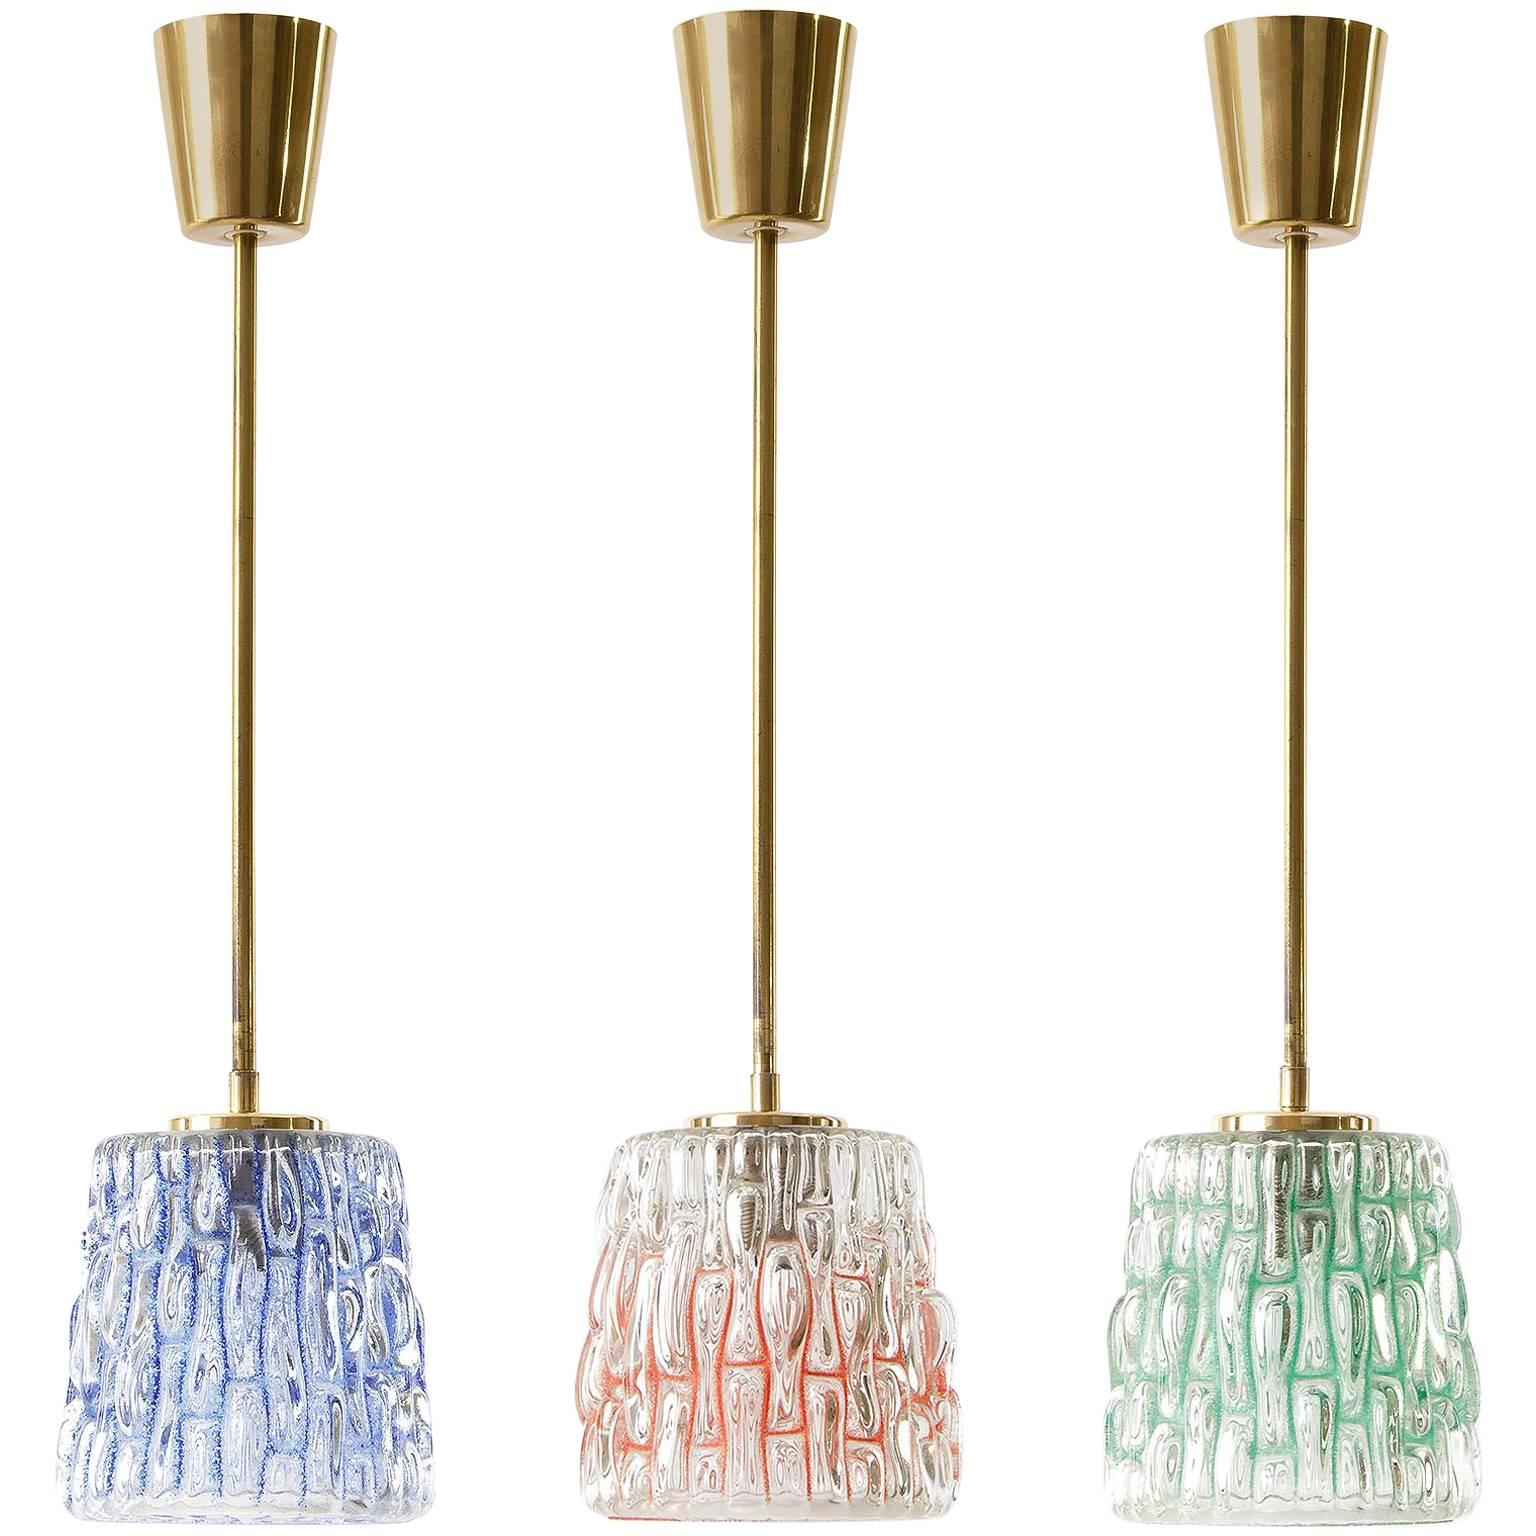 Three Colorful Glass and Brass Pendant Lights by Rupert Nikoll, Austria, 1950s